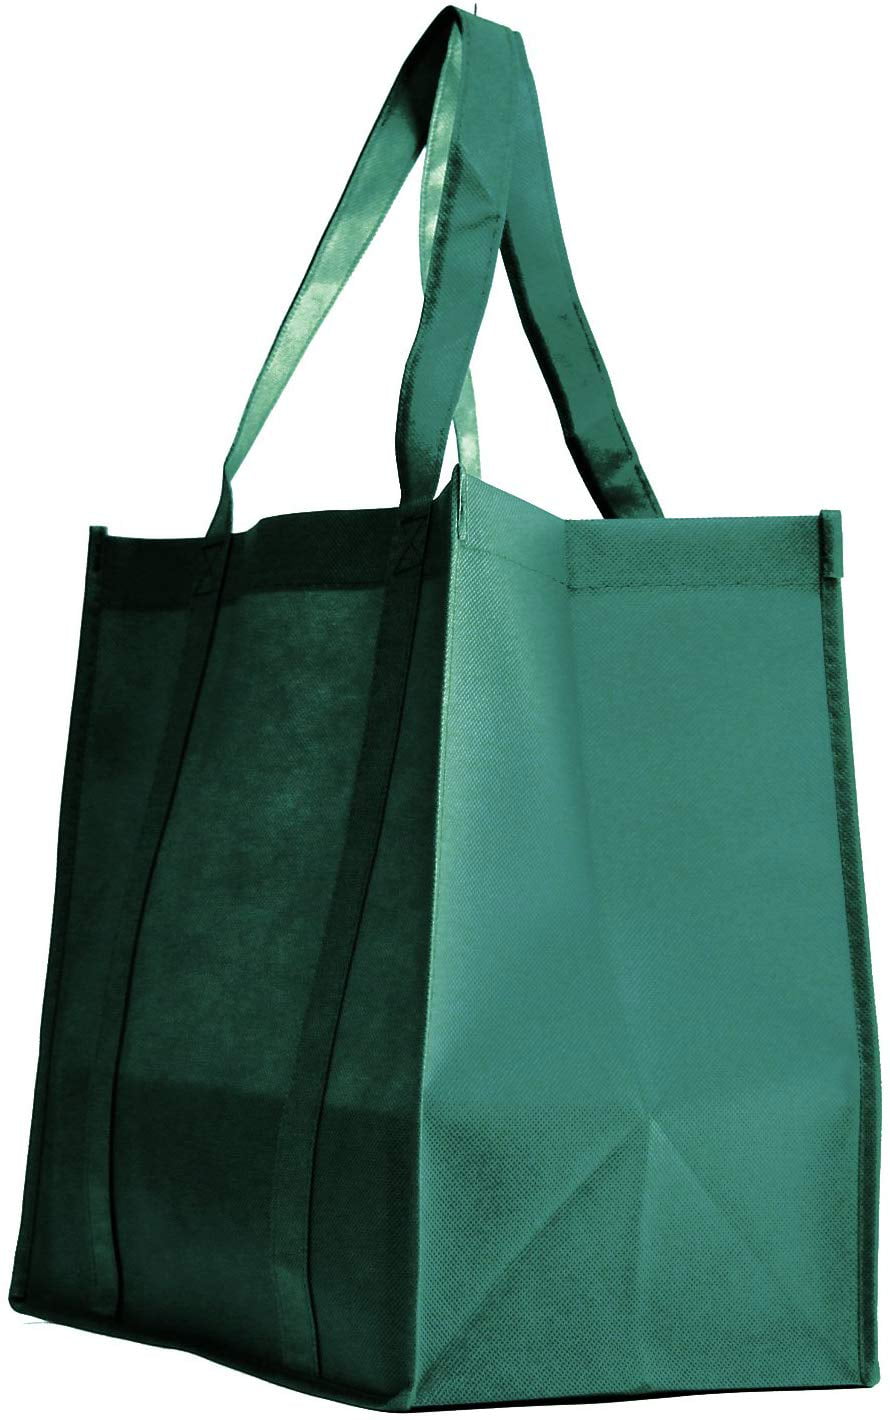 5 Jumbo Size Grocery Tote Shopping Bag Green Reusable Eco Friendly Large Bags 